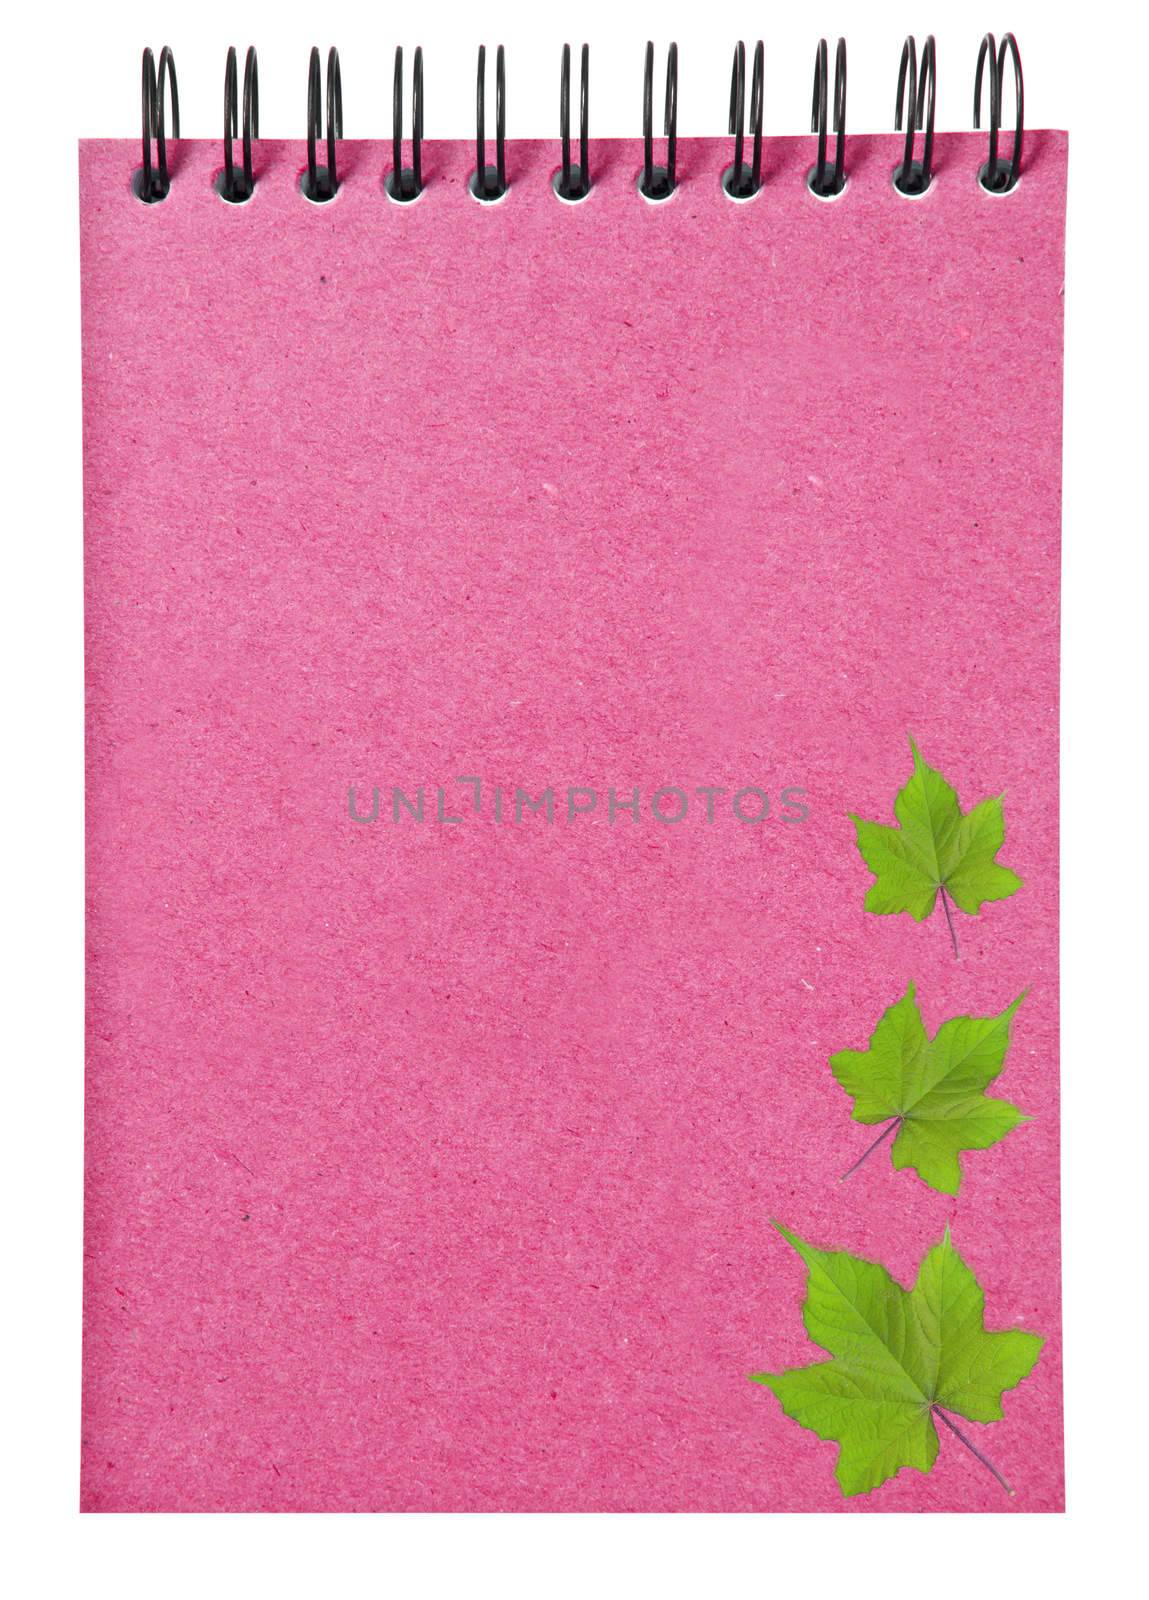 leaves on ring binder pink book isolated on white background, clipping path